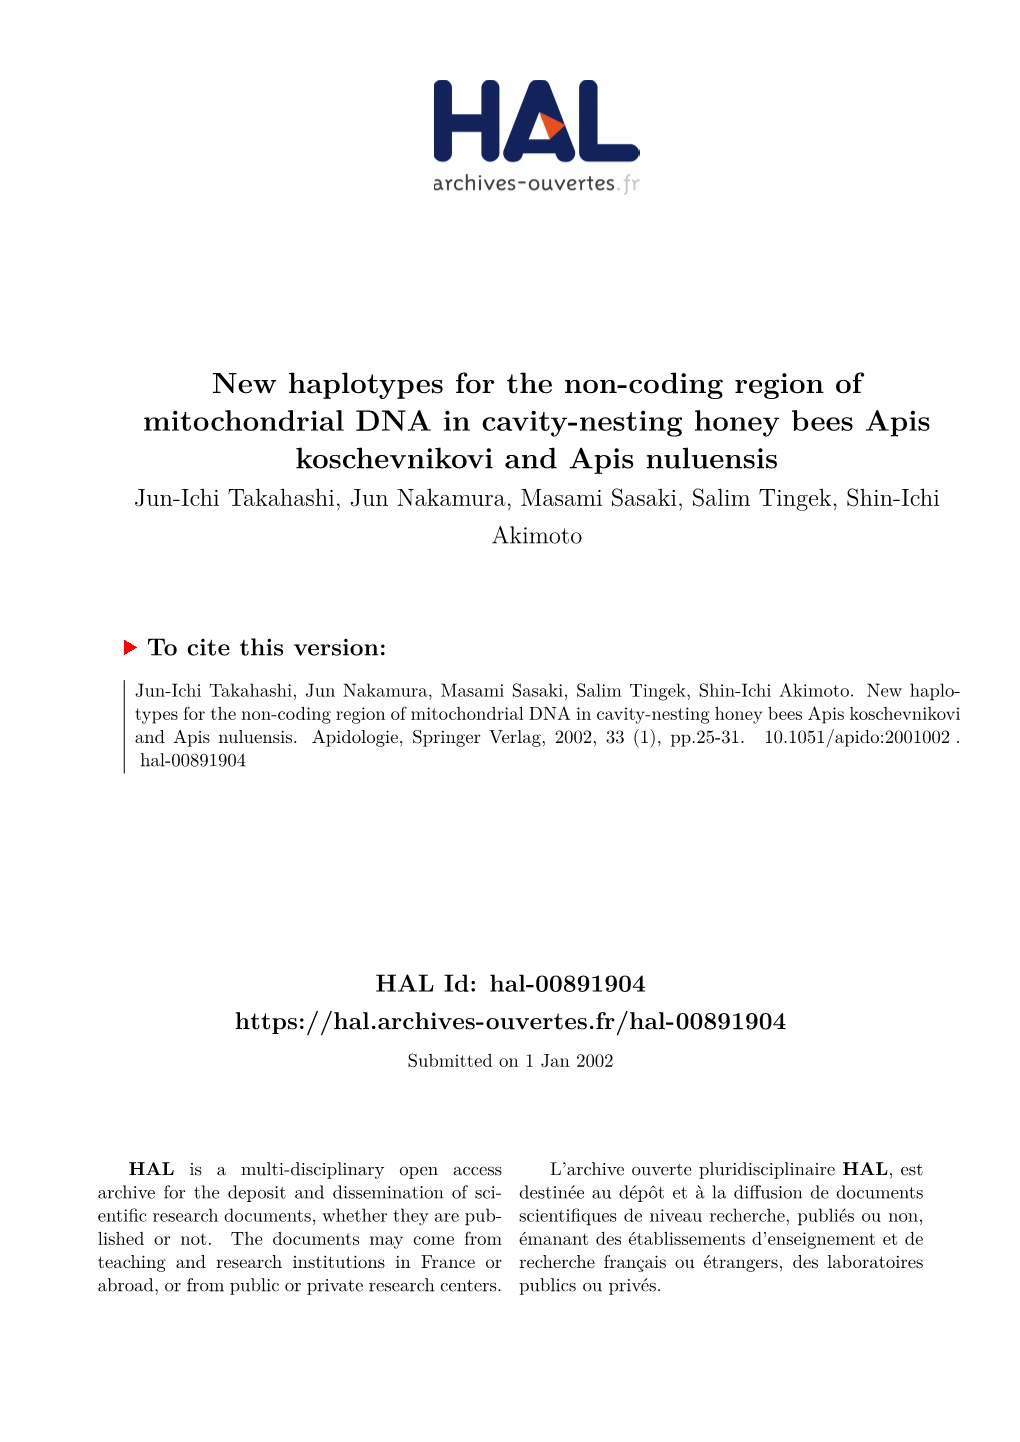 New Haplotypes for the Non-Coding Region of Mitochondrial DNA In